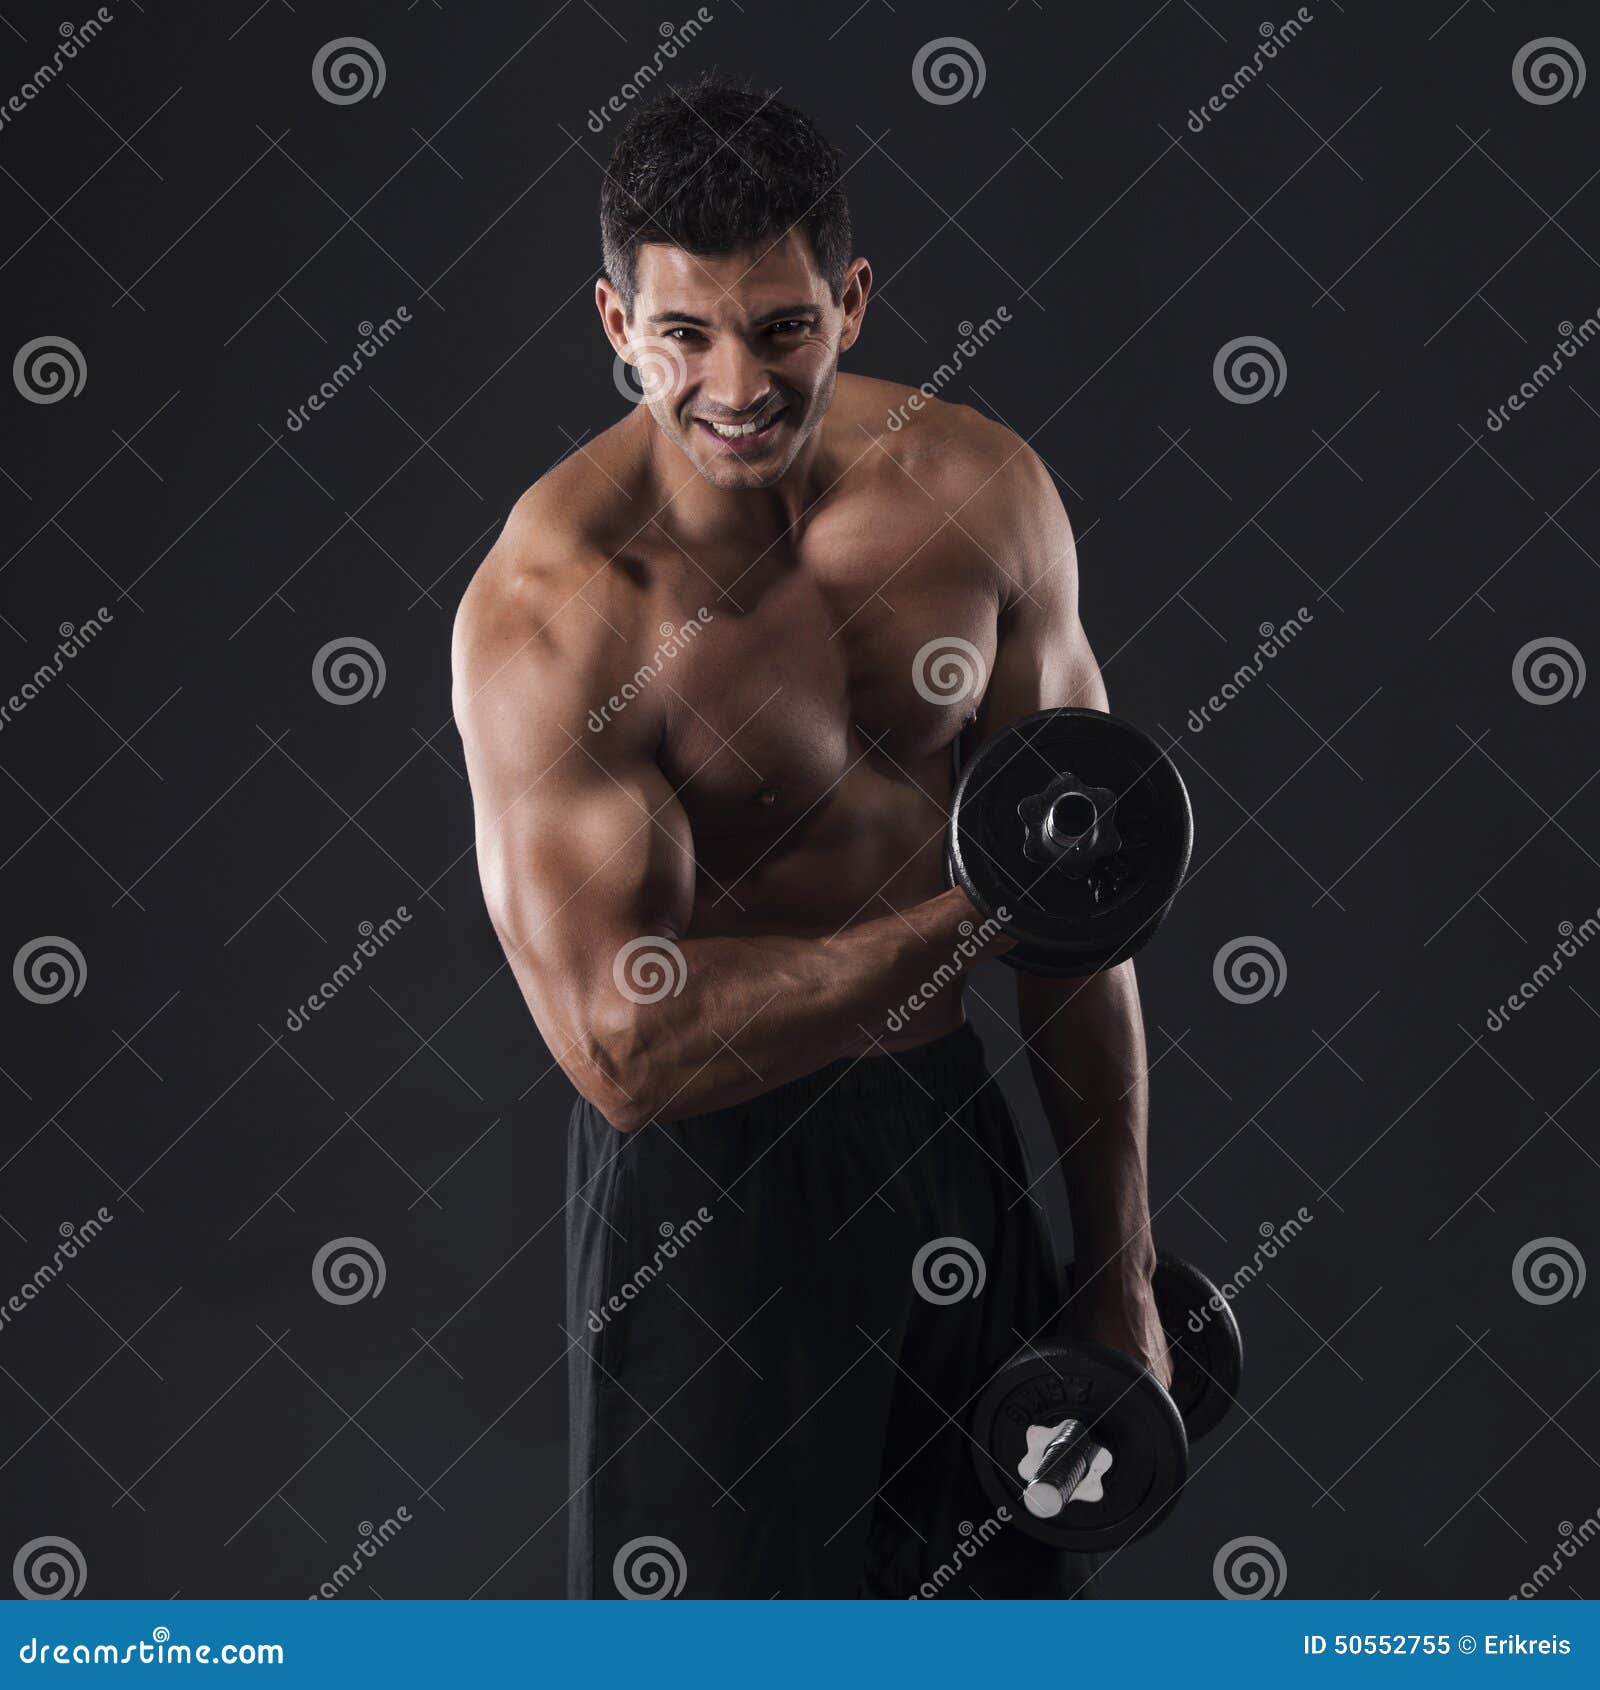 Muscular Naked Man Lifting Dumbbell Stock Images 